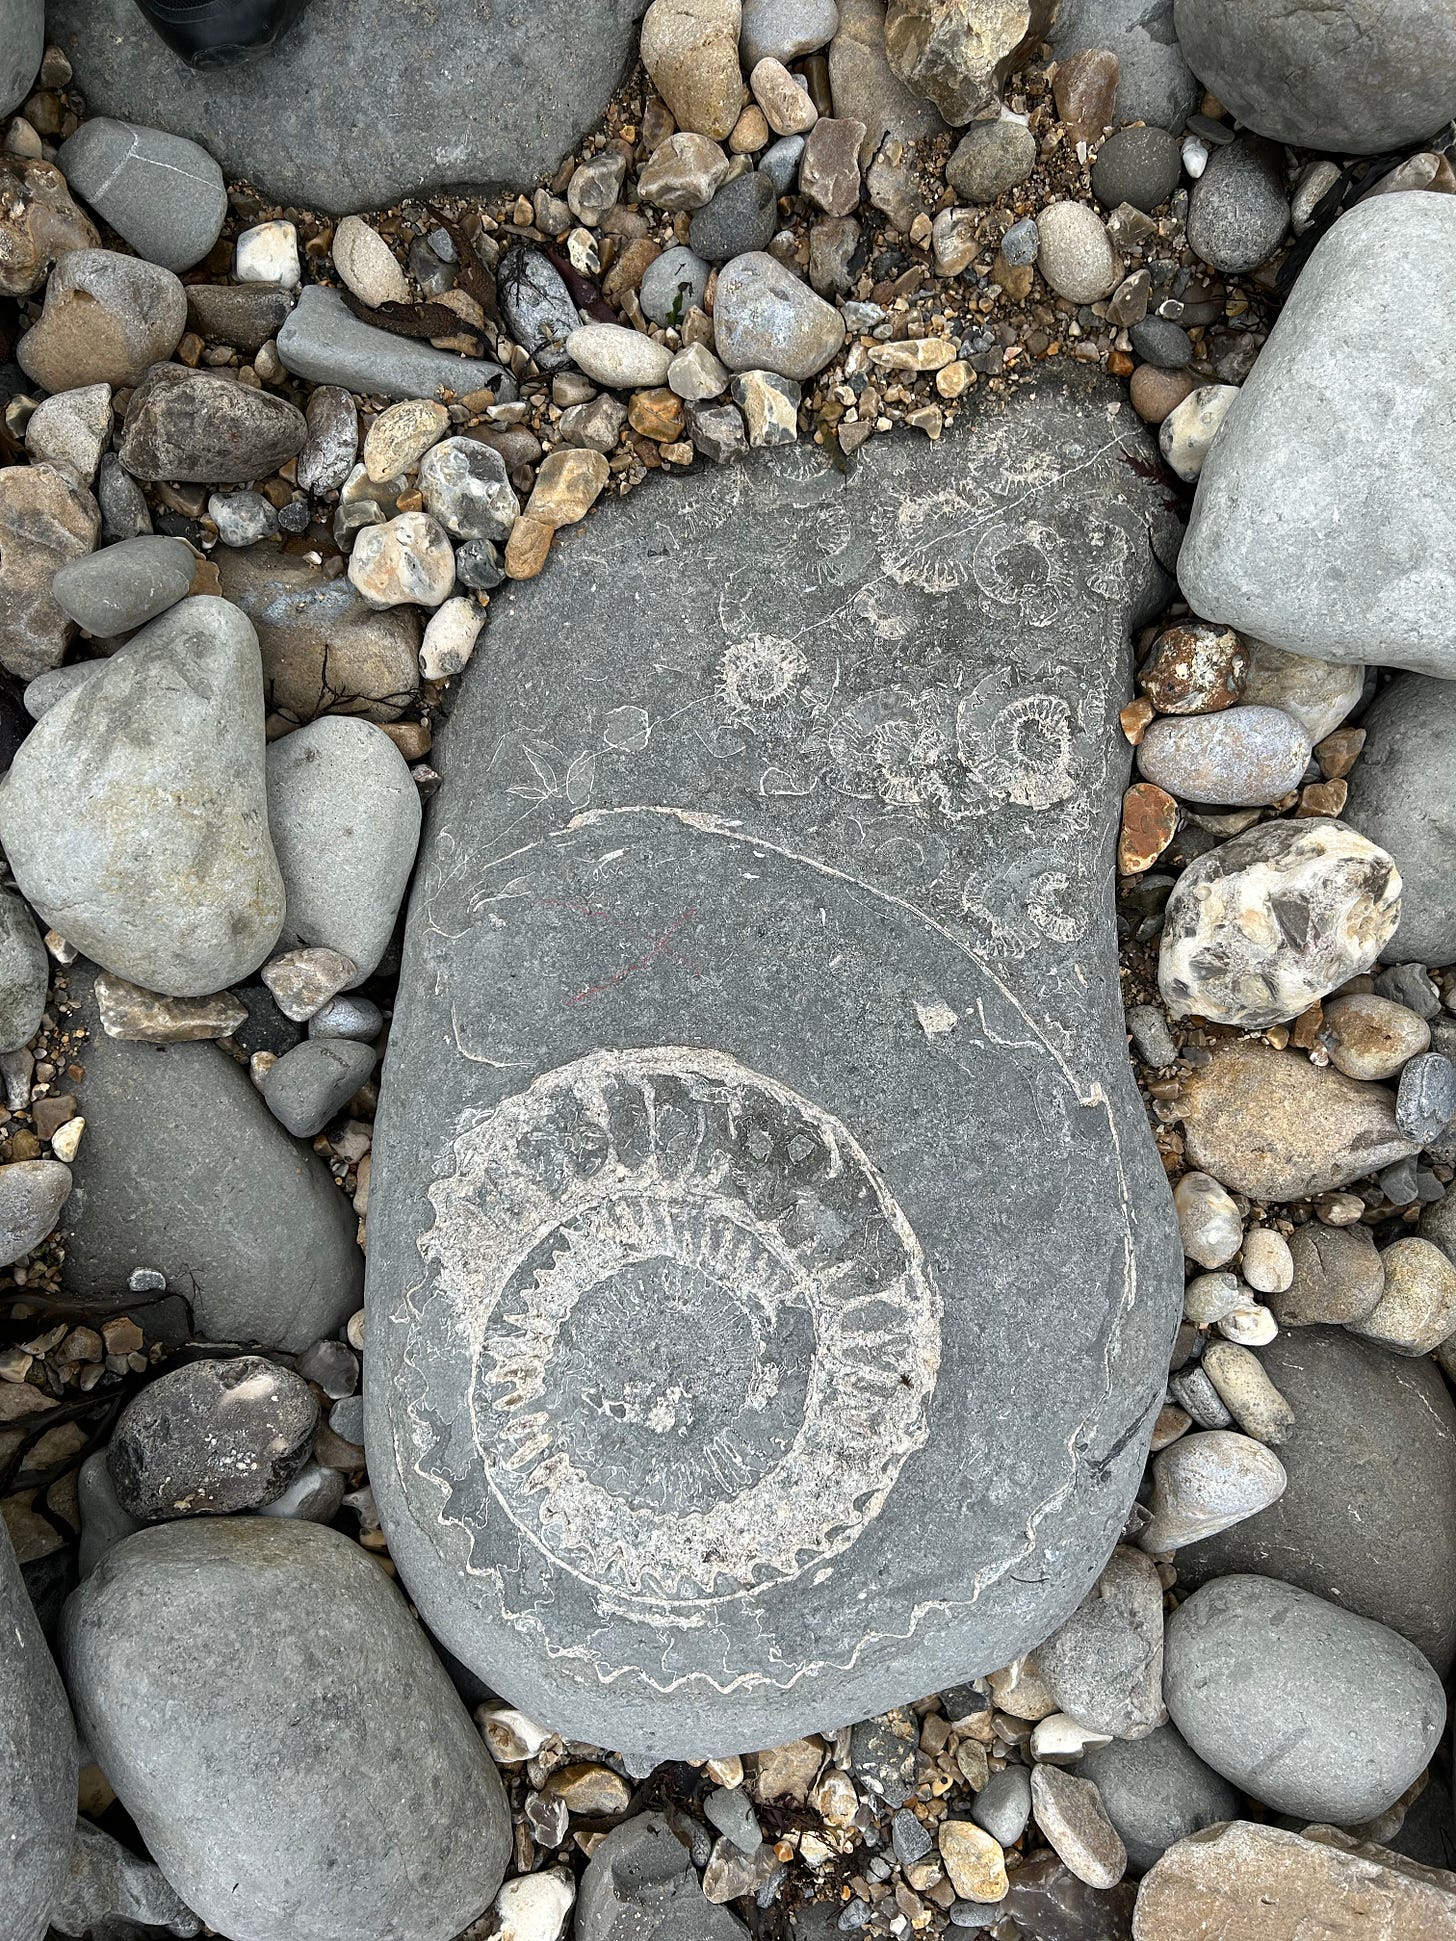 An ammonite fossil in a rock on Monmouth Beach, Lyme Regis.  Image: Roland's Travels